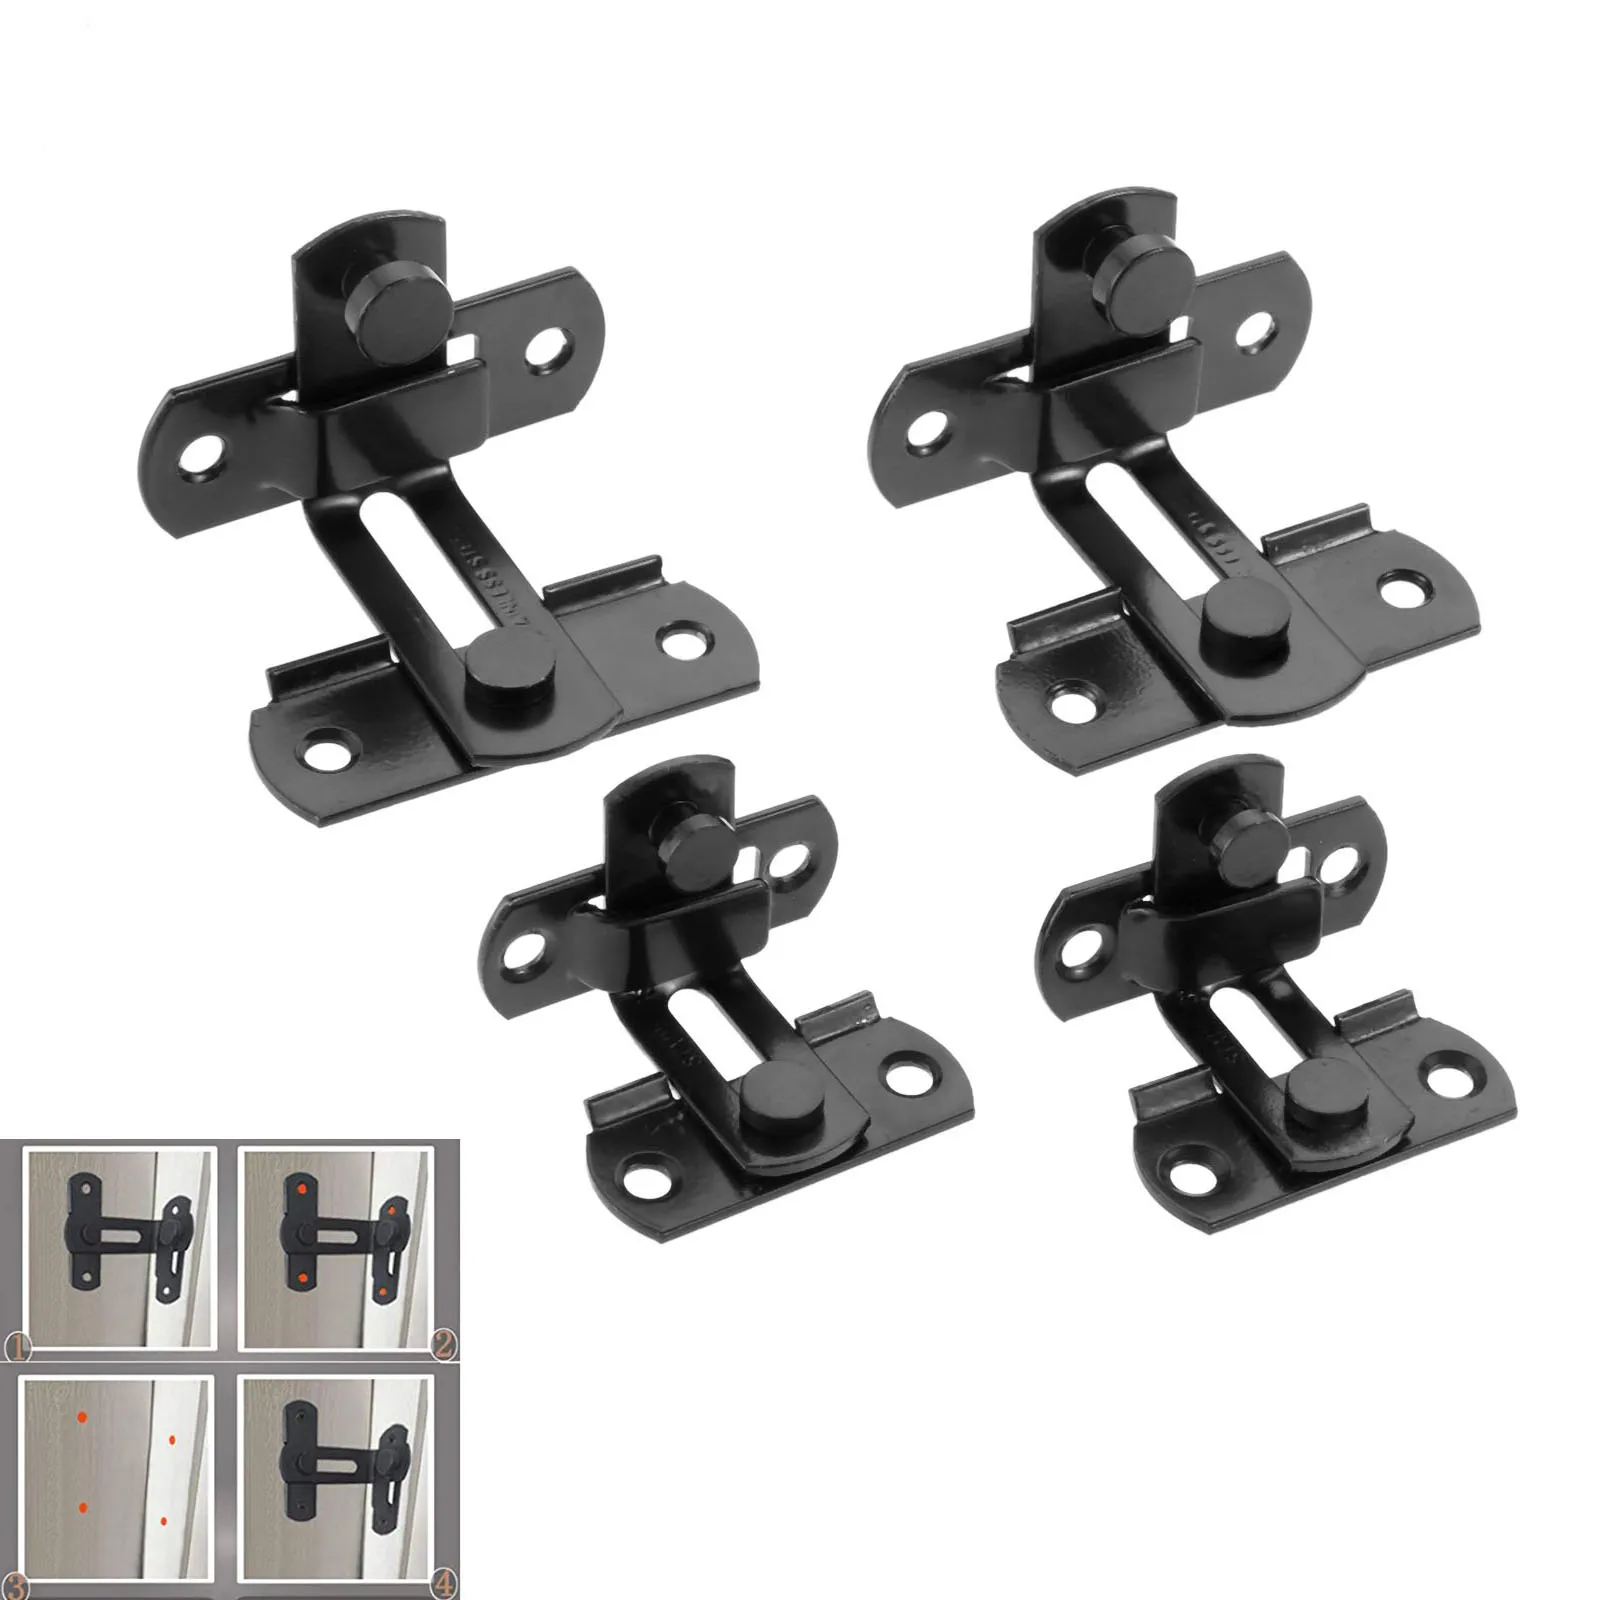 

2Pcs Stainless Steel 90 Degree Door Latch Buckles Furniture Lock Hasp For Sliding Door Cabinet Drawer Anti-Corrosion Buckle